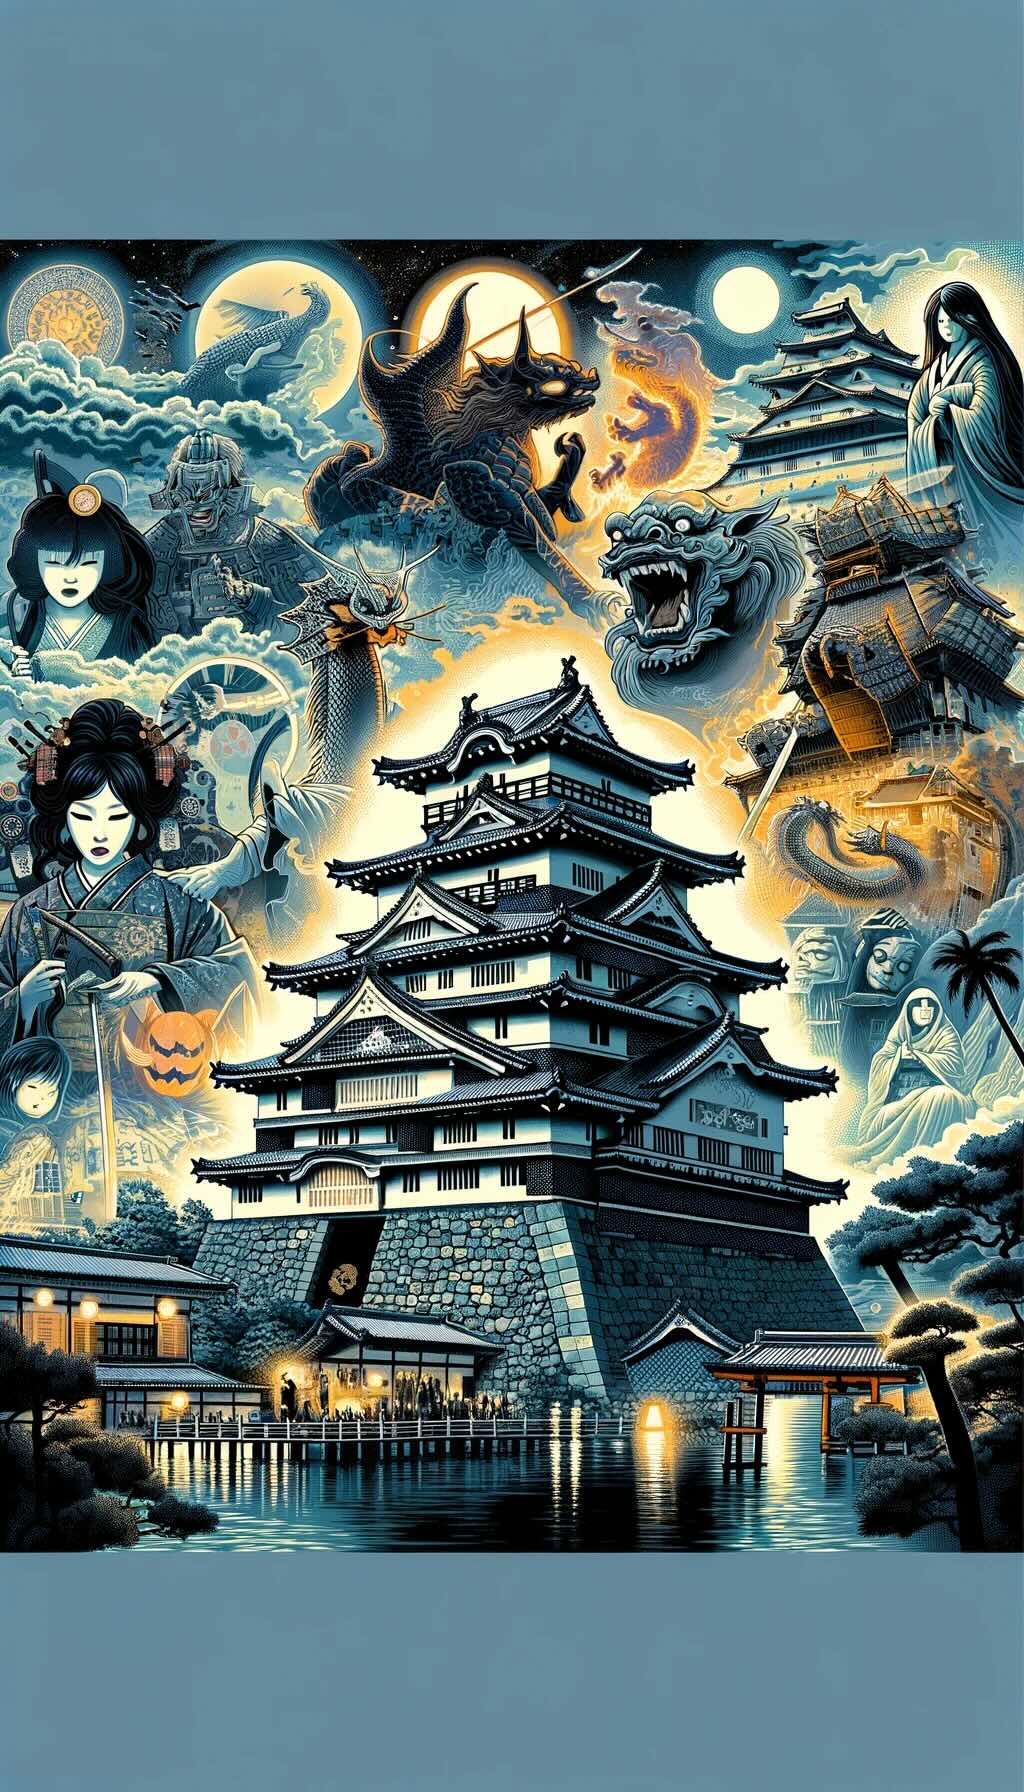 Mysteries and myths surrounding samurai castles in Japan showcases ghost stories, hidden secrets, and legendary tales, including those of Himeji Castle, Tsuruga Castle, and Fushimi Castle, along with elements like hidden rooms, escape routes, and secret tunnels. The dynamic and mystical background emphasizes the enchanting and mysterious side of Japan's feudal heritage.